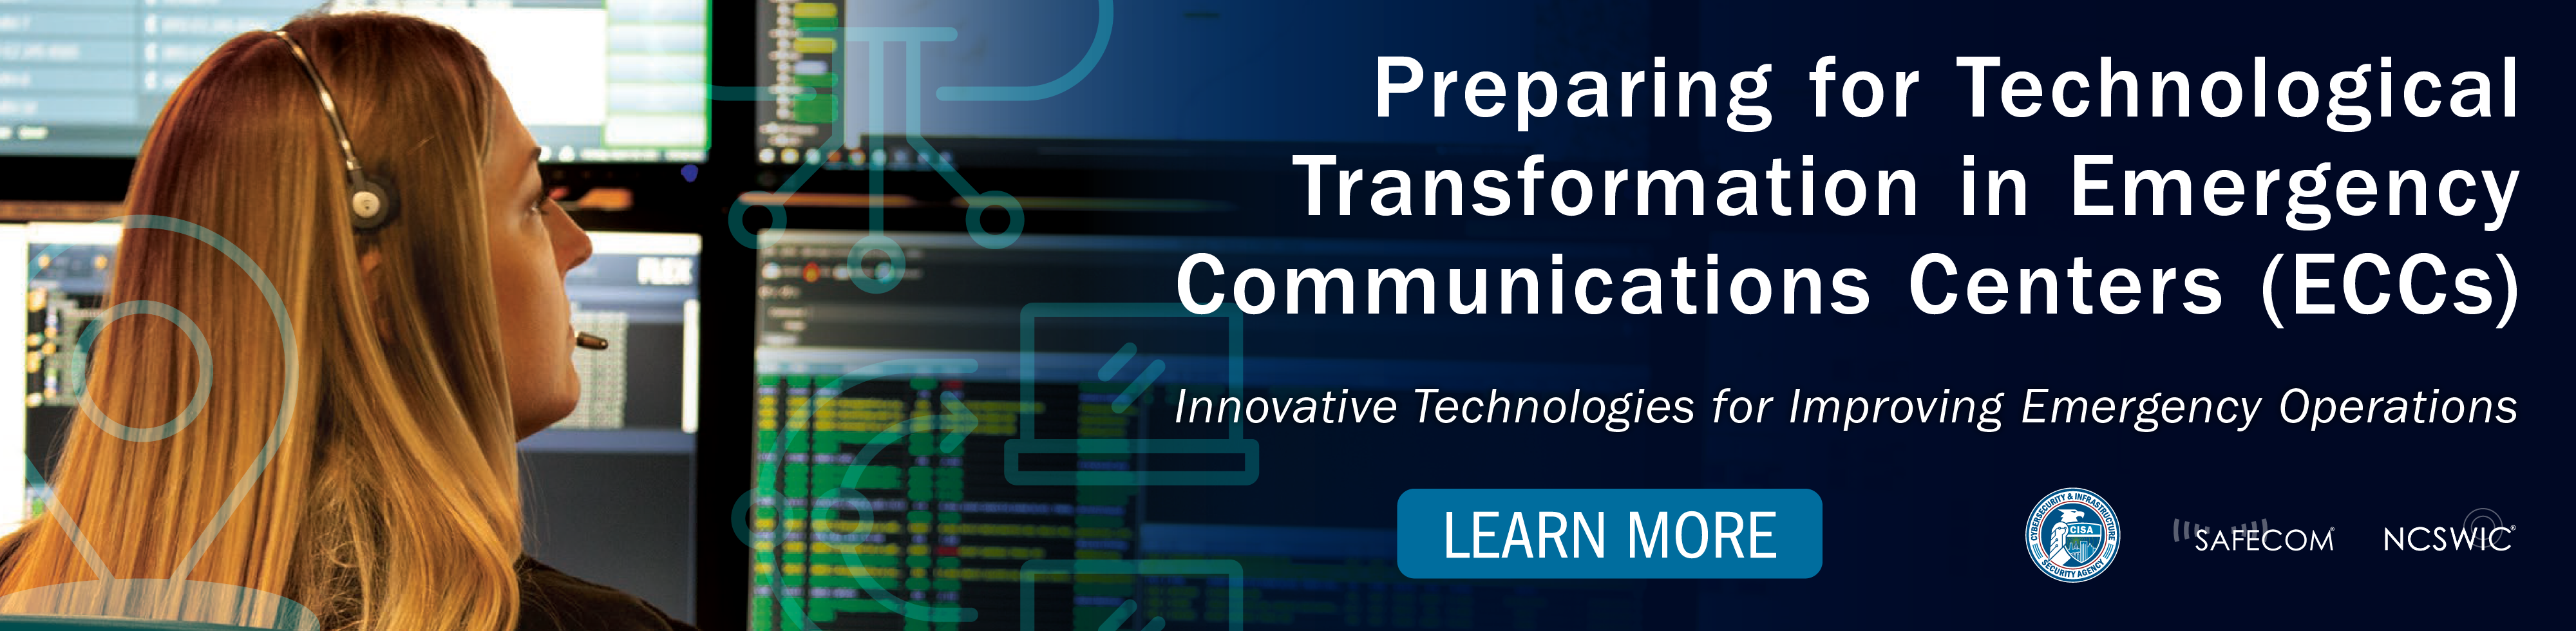 Preparing for Technological Transformation in Emergency Communicationi Centers (ECCs).  Innovative Technologies for Improving Emergency Operations. Learn More. SAFECOM - NCSWIC